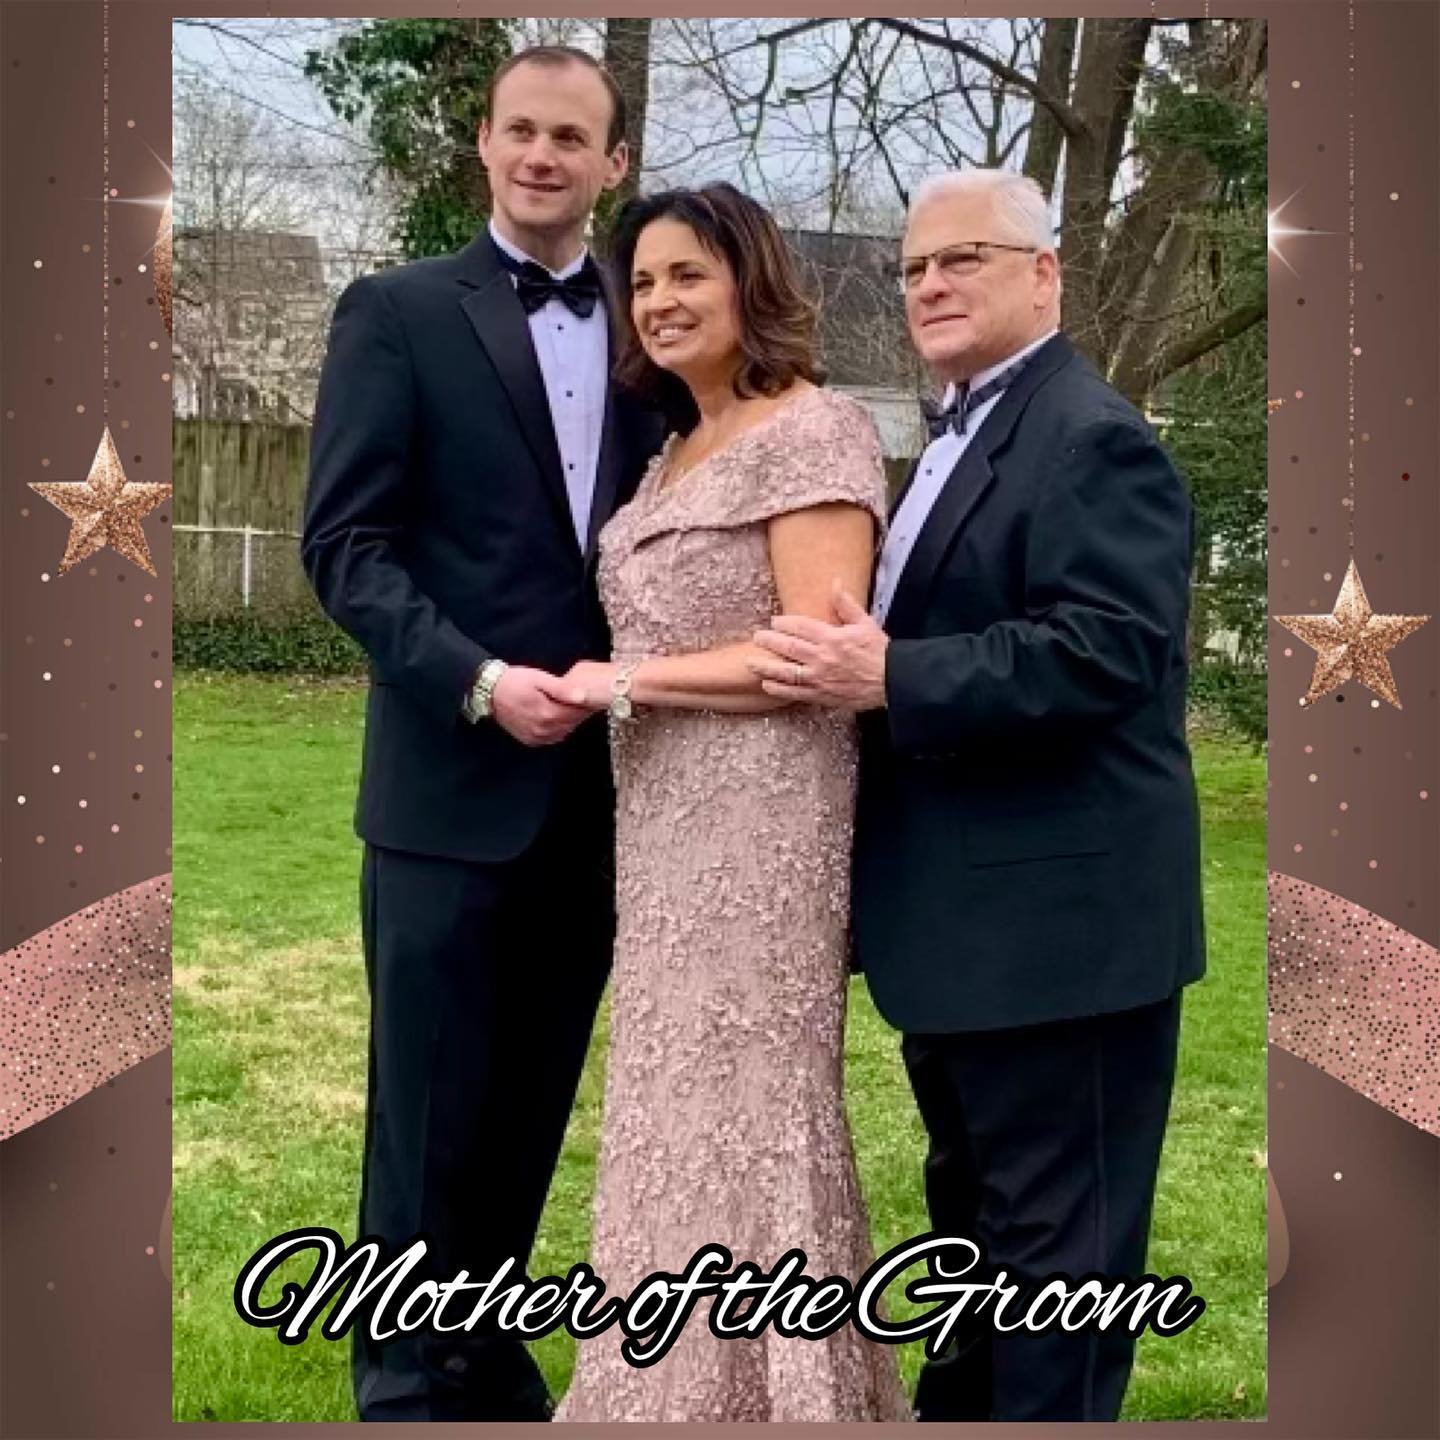 Michelle did a beautiful job on her client Maria ❤️ She did a gorgeous blow dry style and full face of makeup with lashes 💐 Maria truly looks stunning as the Mother of the Groom 👏🏼 @michellerose_hair #theartistry2020nj #redken #redkenobsessed #red